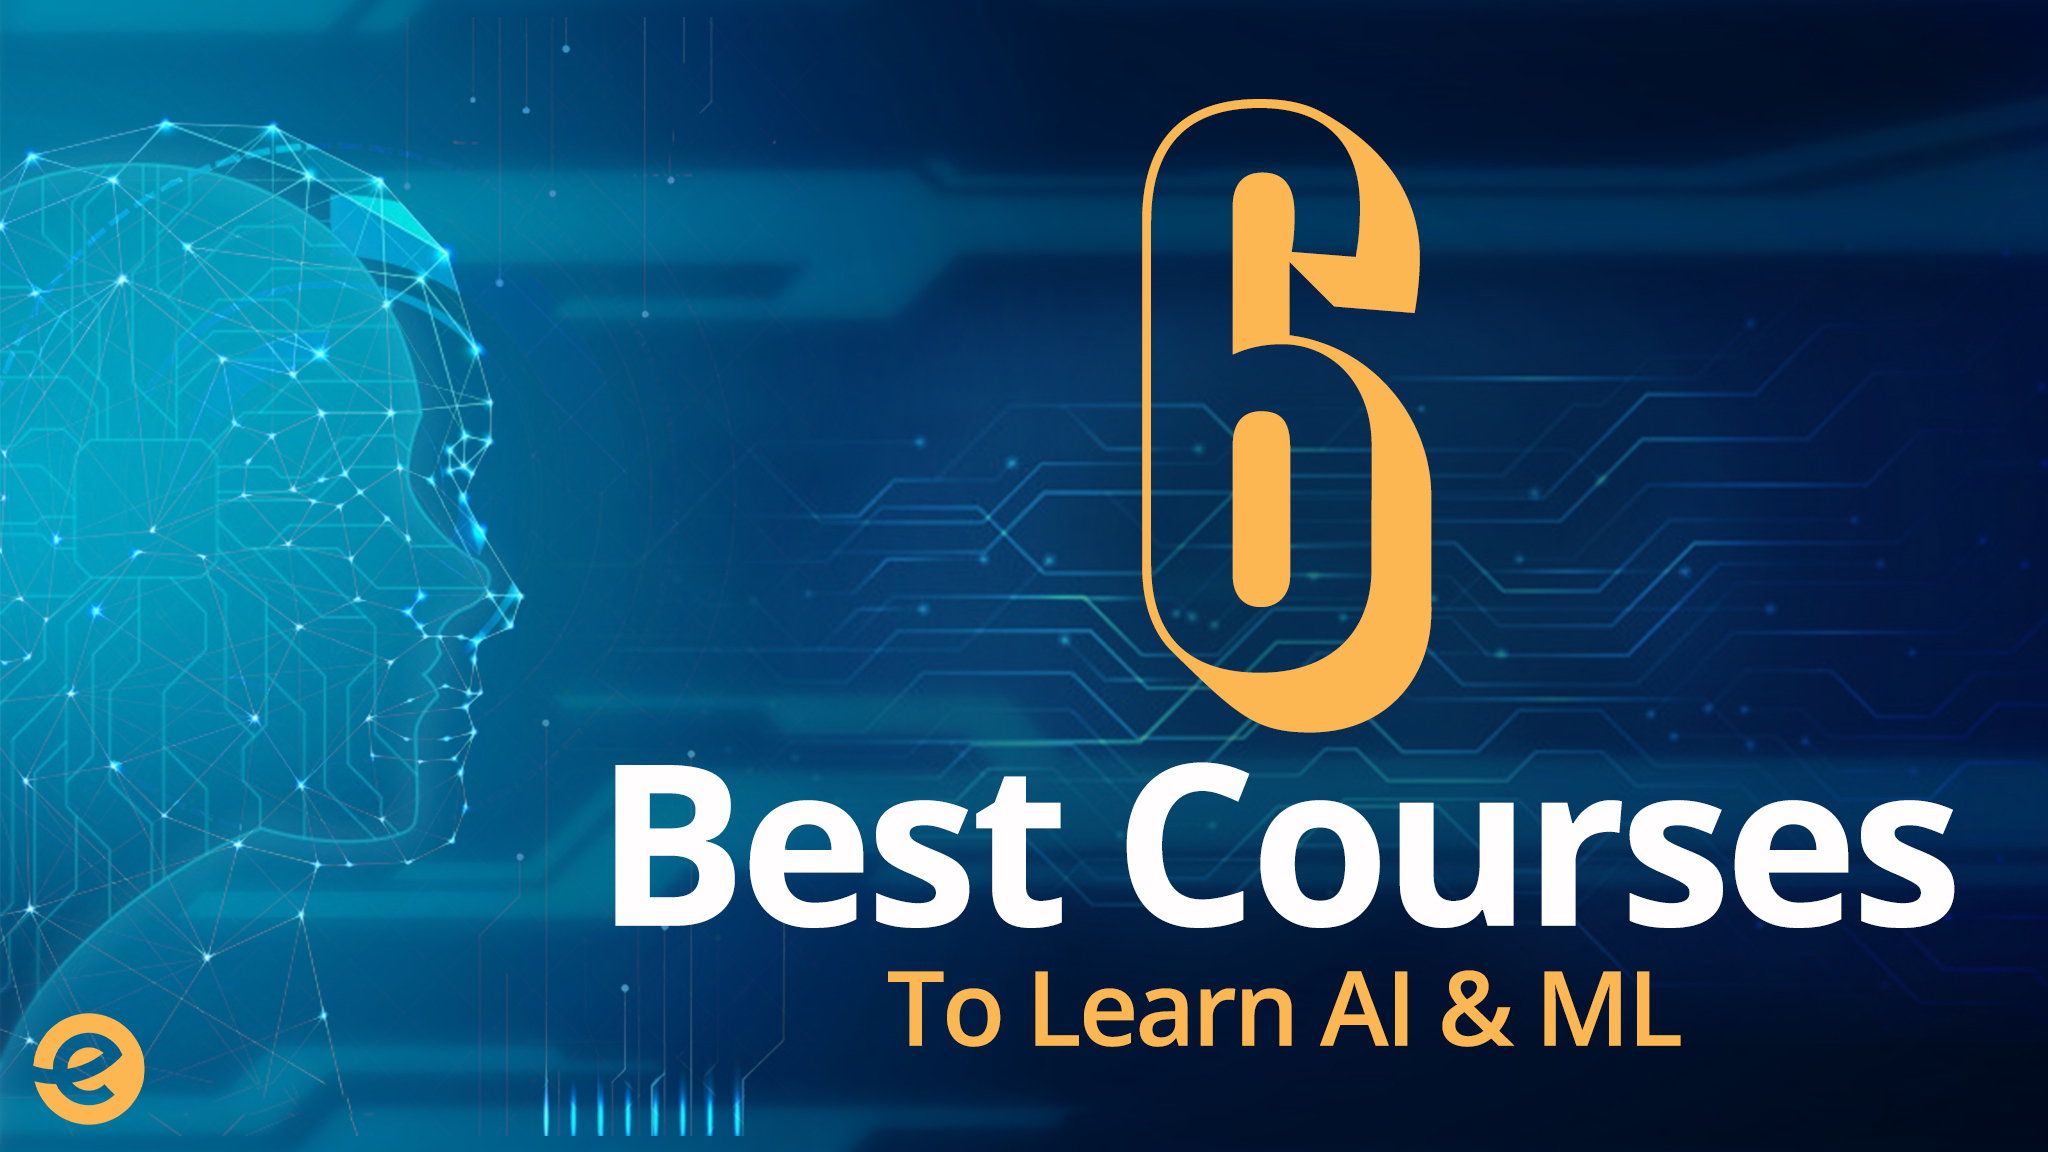 Start Learning Machine Learning Today with Top 6 Courses for AI & ML